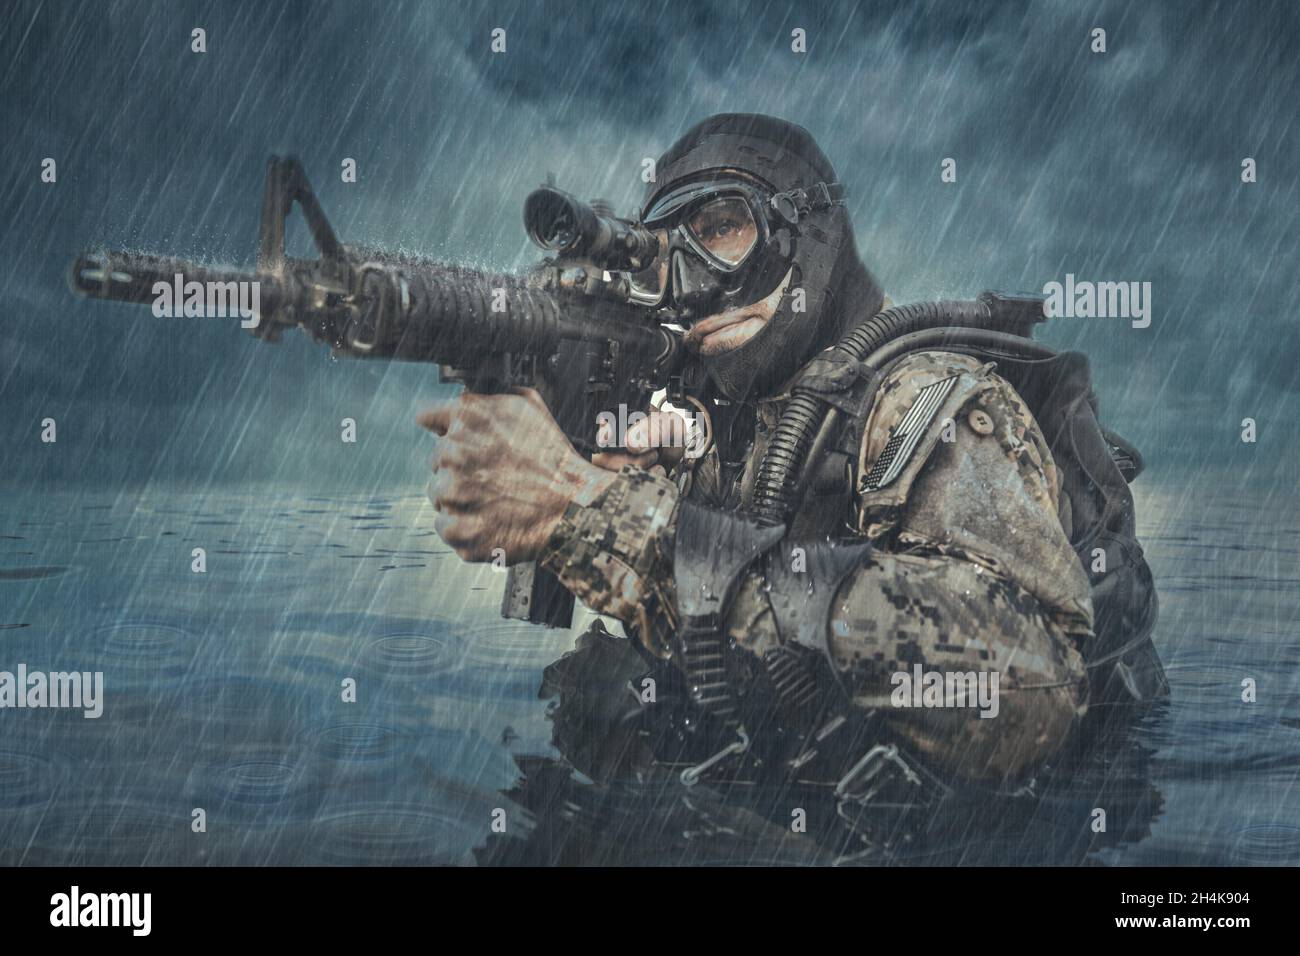 Navy SEAL frogman with complete diving gear and weapons in the water. Stock Photo